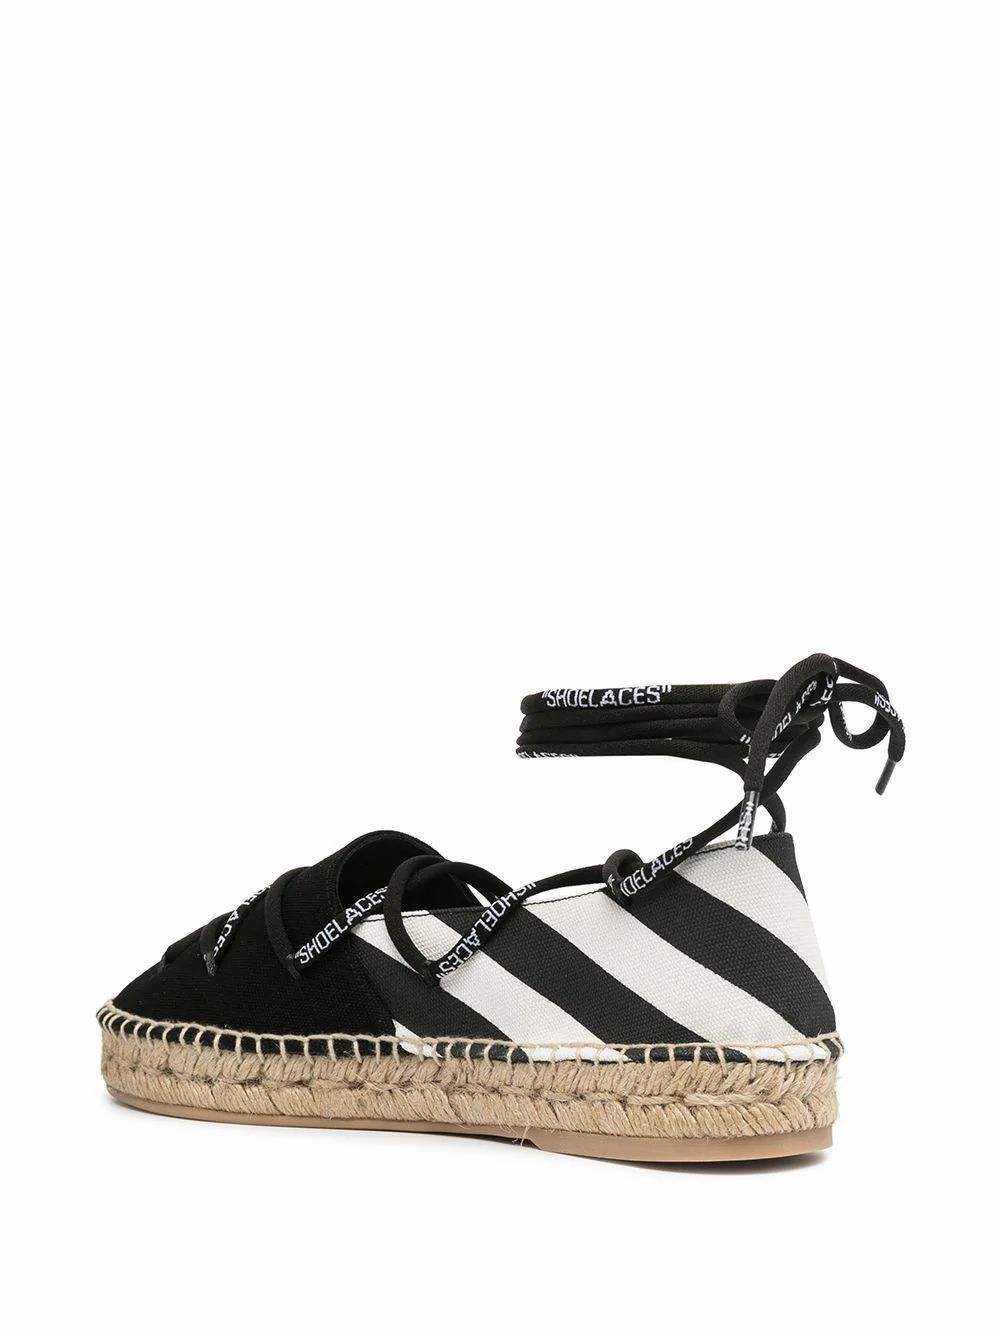 ESPADRILLES OFF-WHITE, COTTON 100%, color BLACK, Rubber sole, SS21, product code OWIB002R21FAB0016110